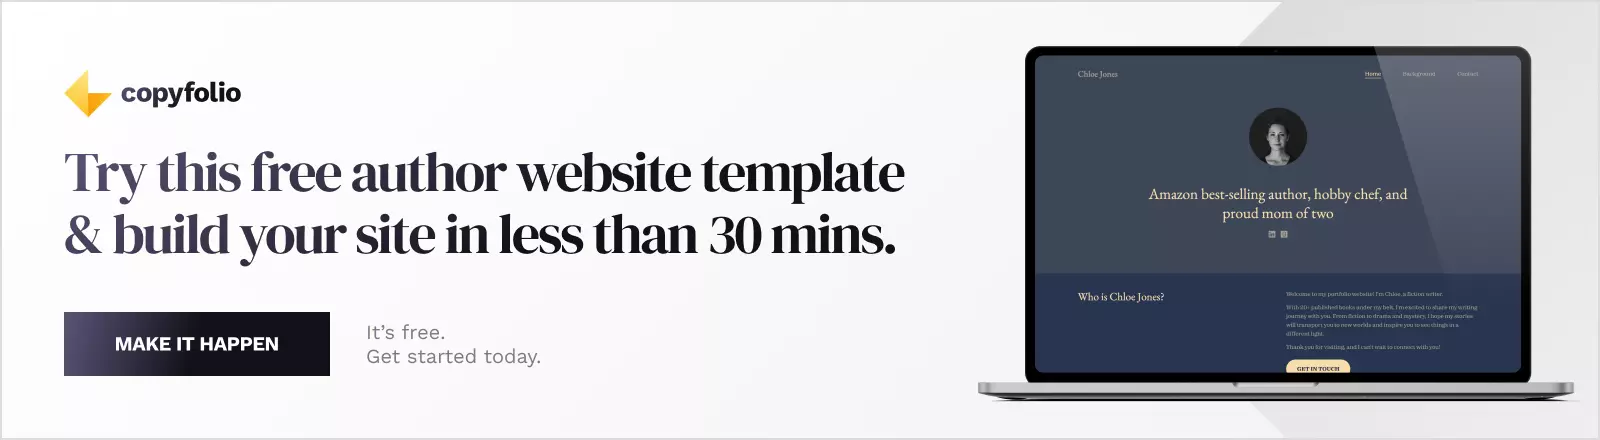 Banner saying: try this free author website template and build your site in less than 30 mins.